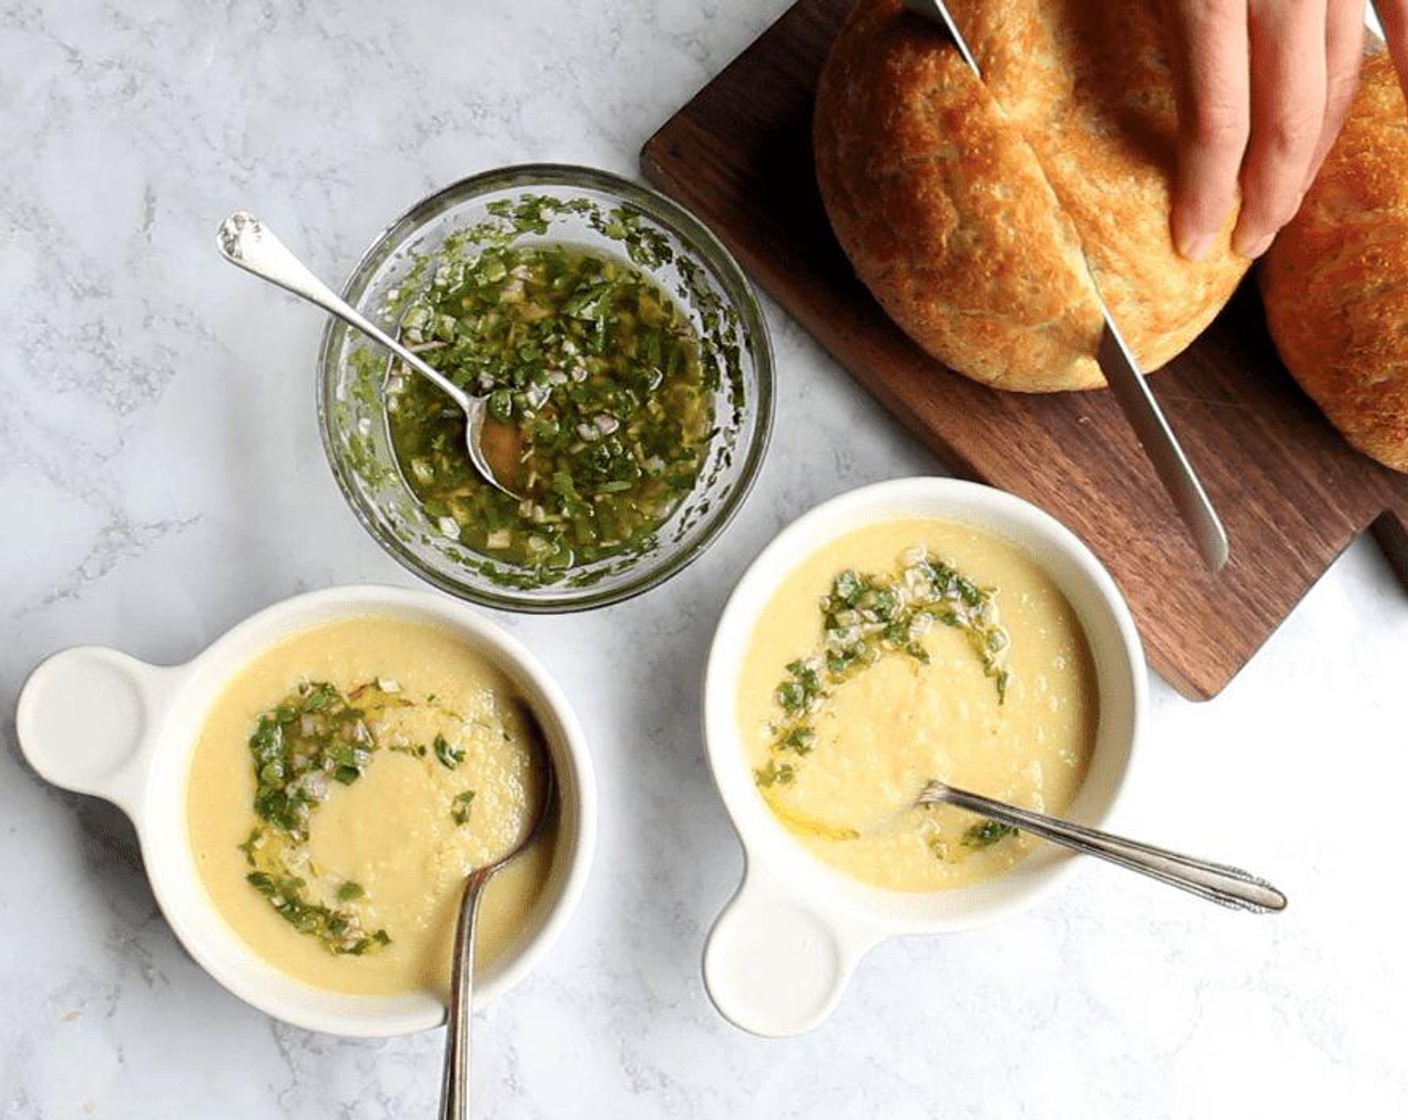 Five Ingredient Corn Soup with Herb Salsa